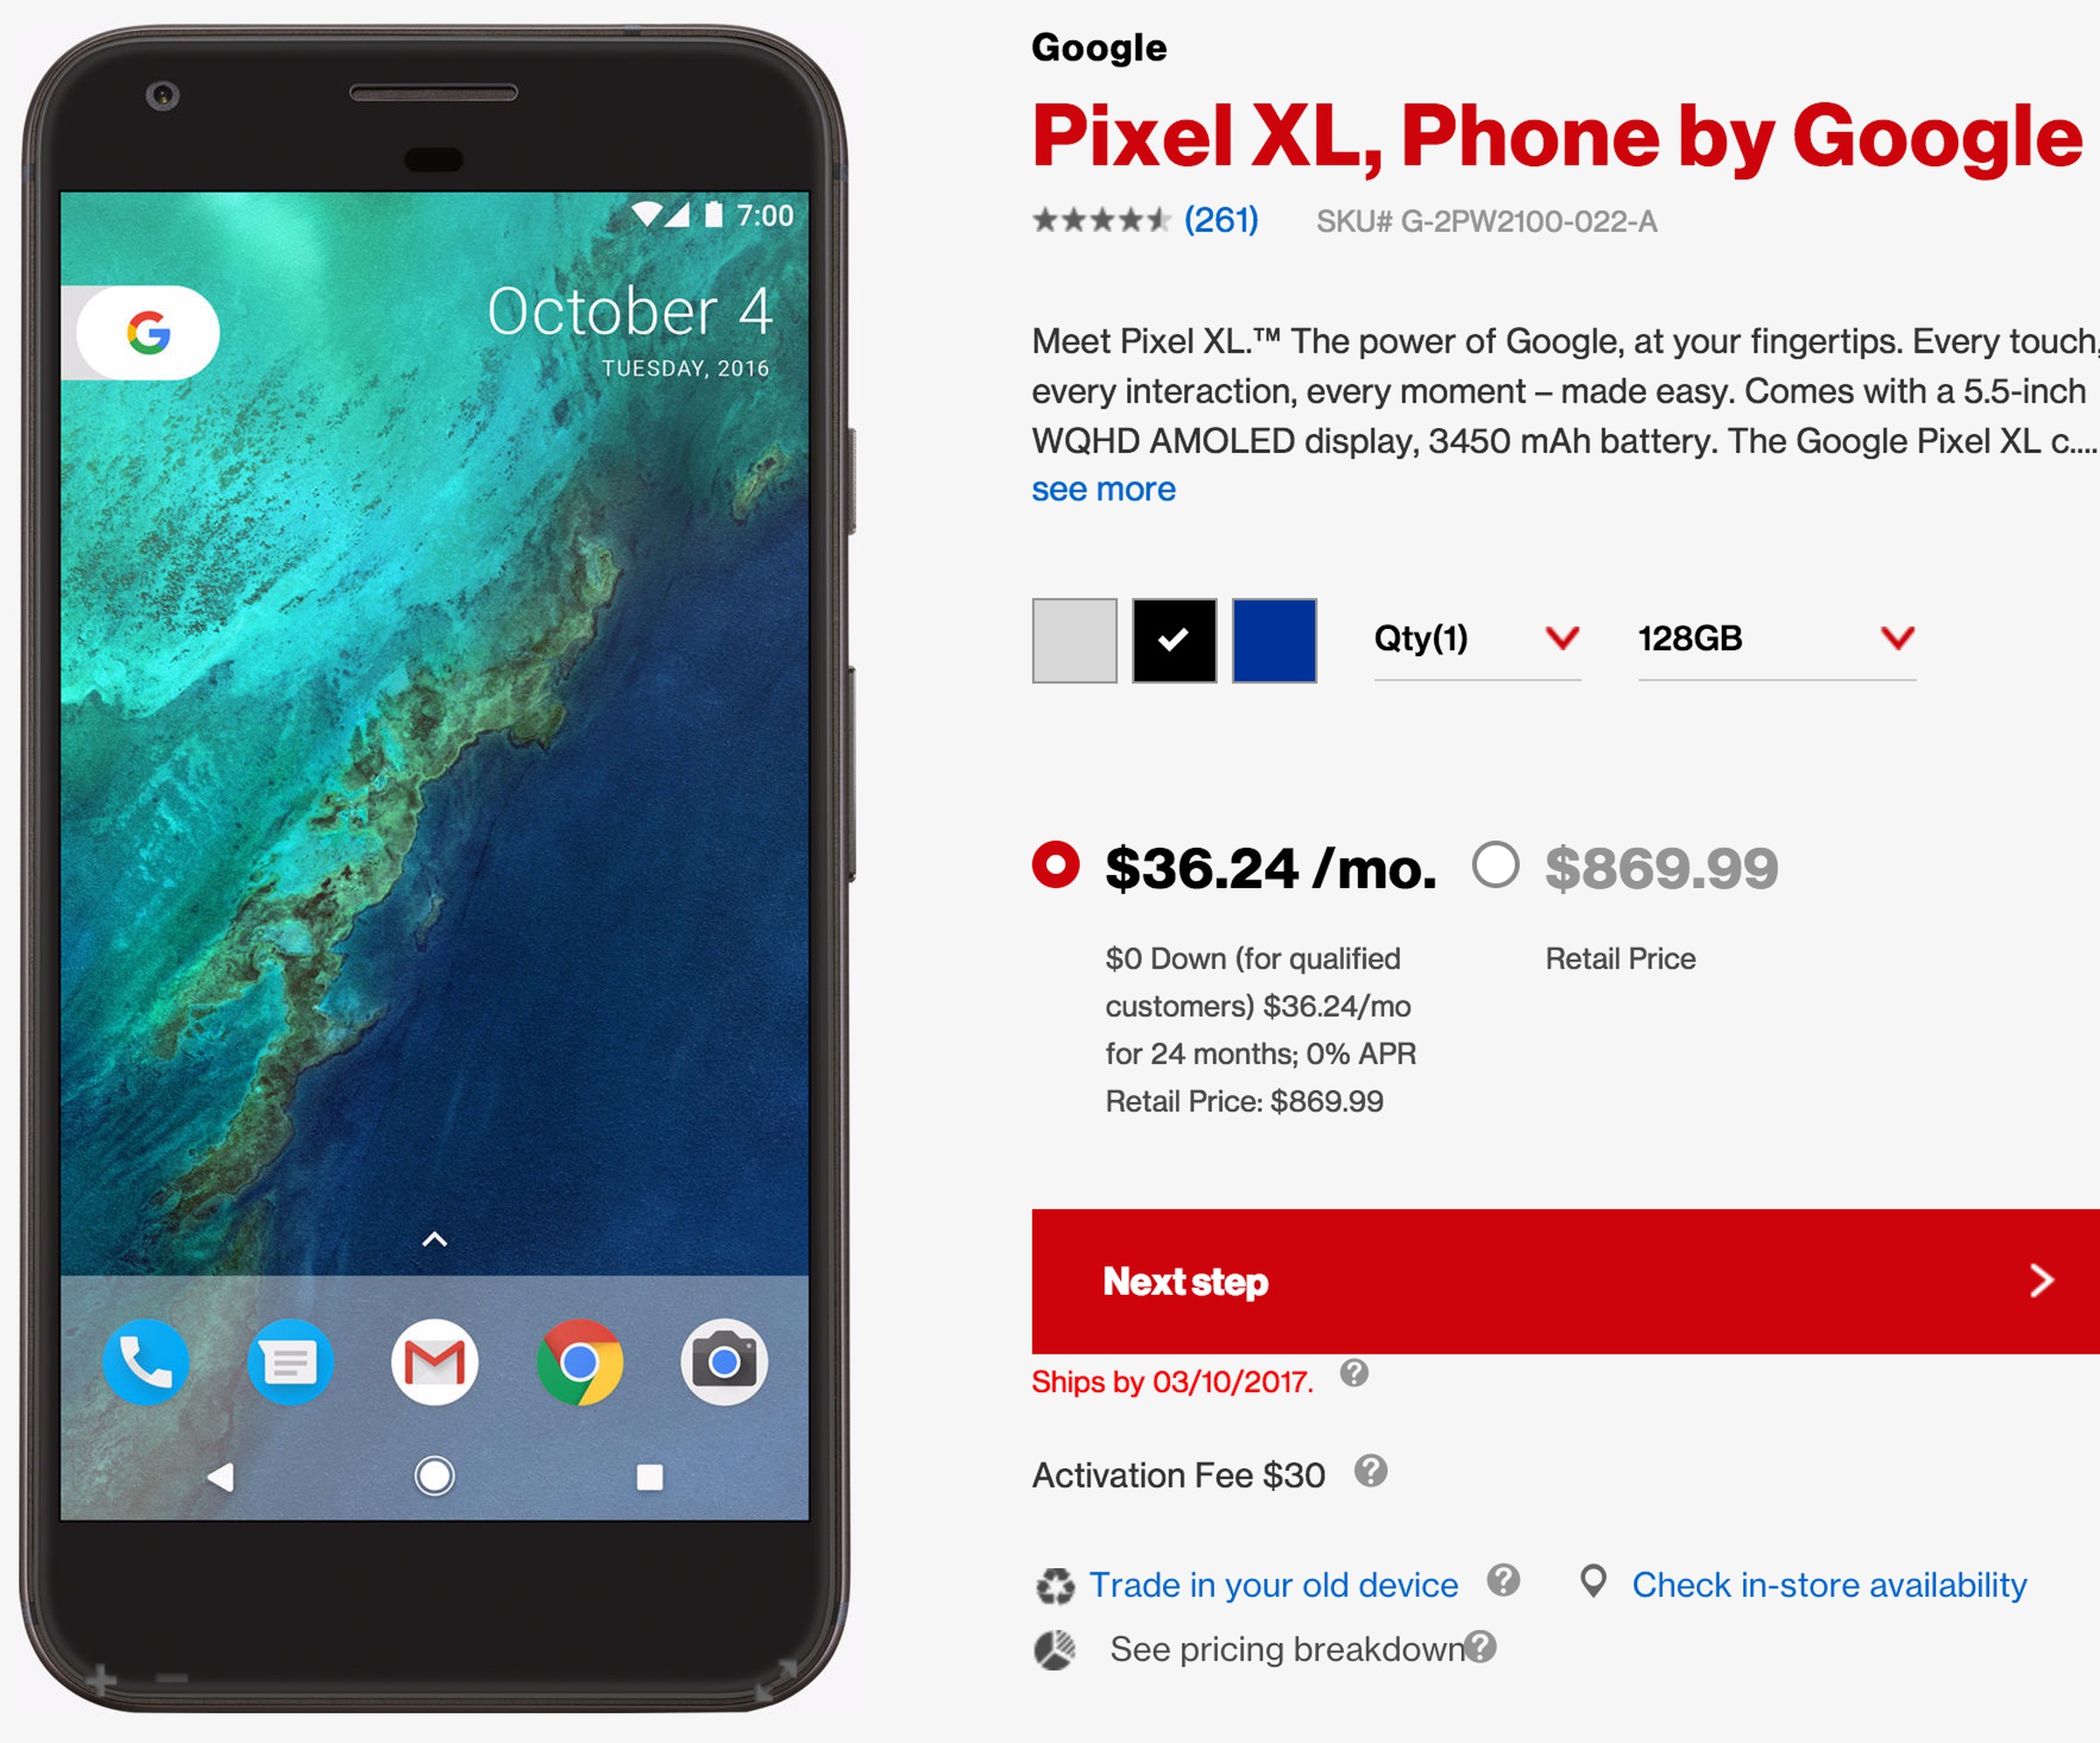 The 128GB Pixel XL is backordered until March at Verizon Wireless.